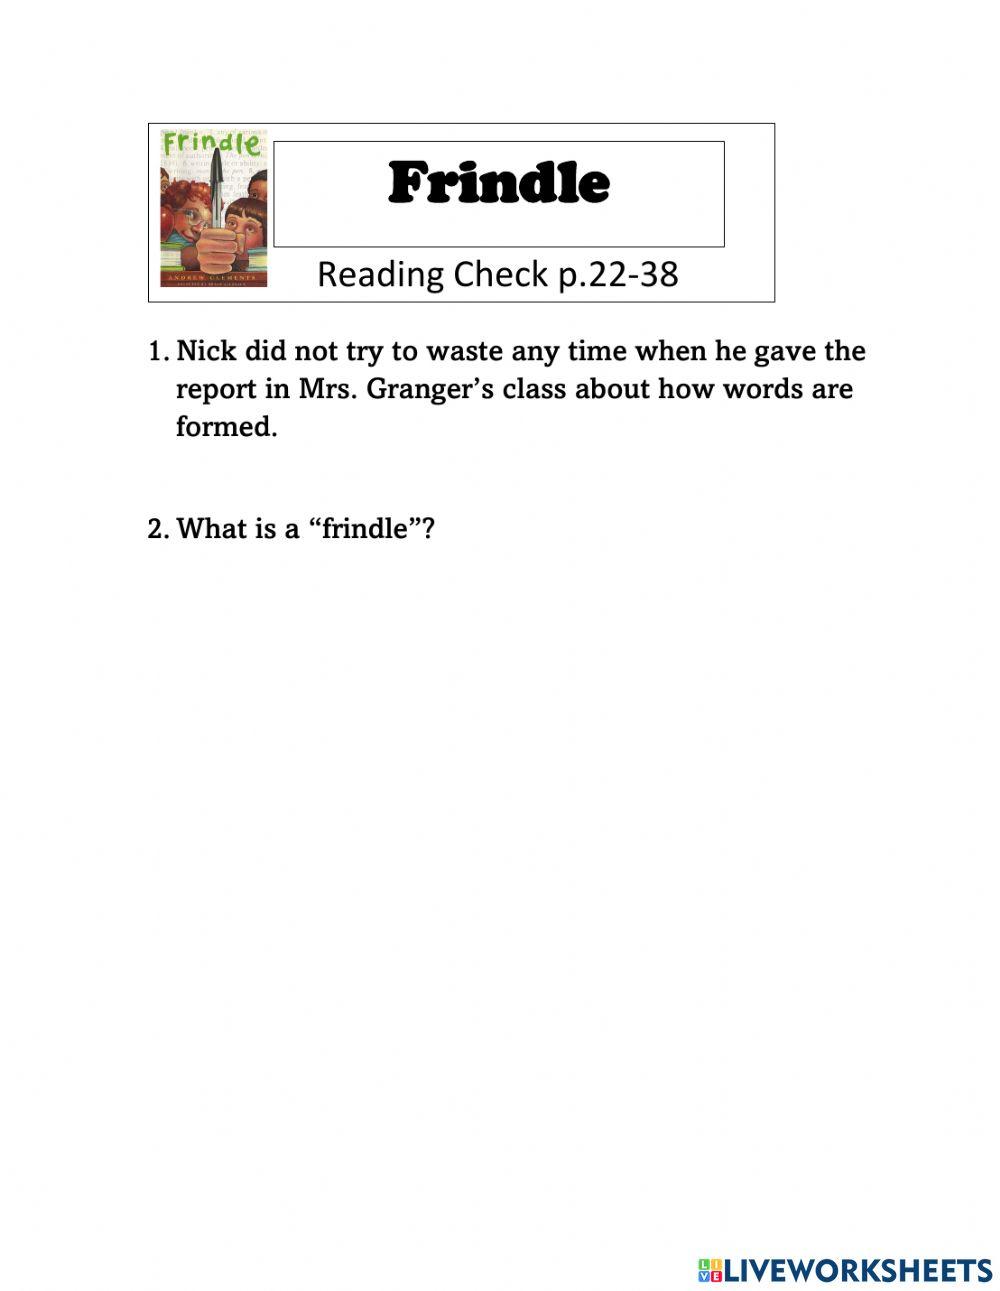 Frindle Reading Check p.22-38